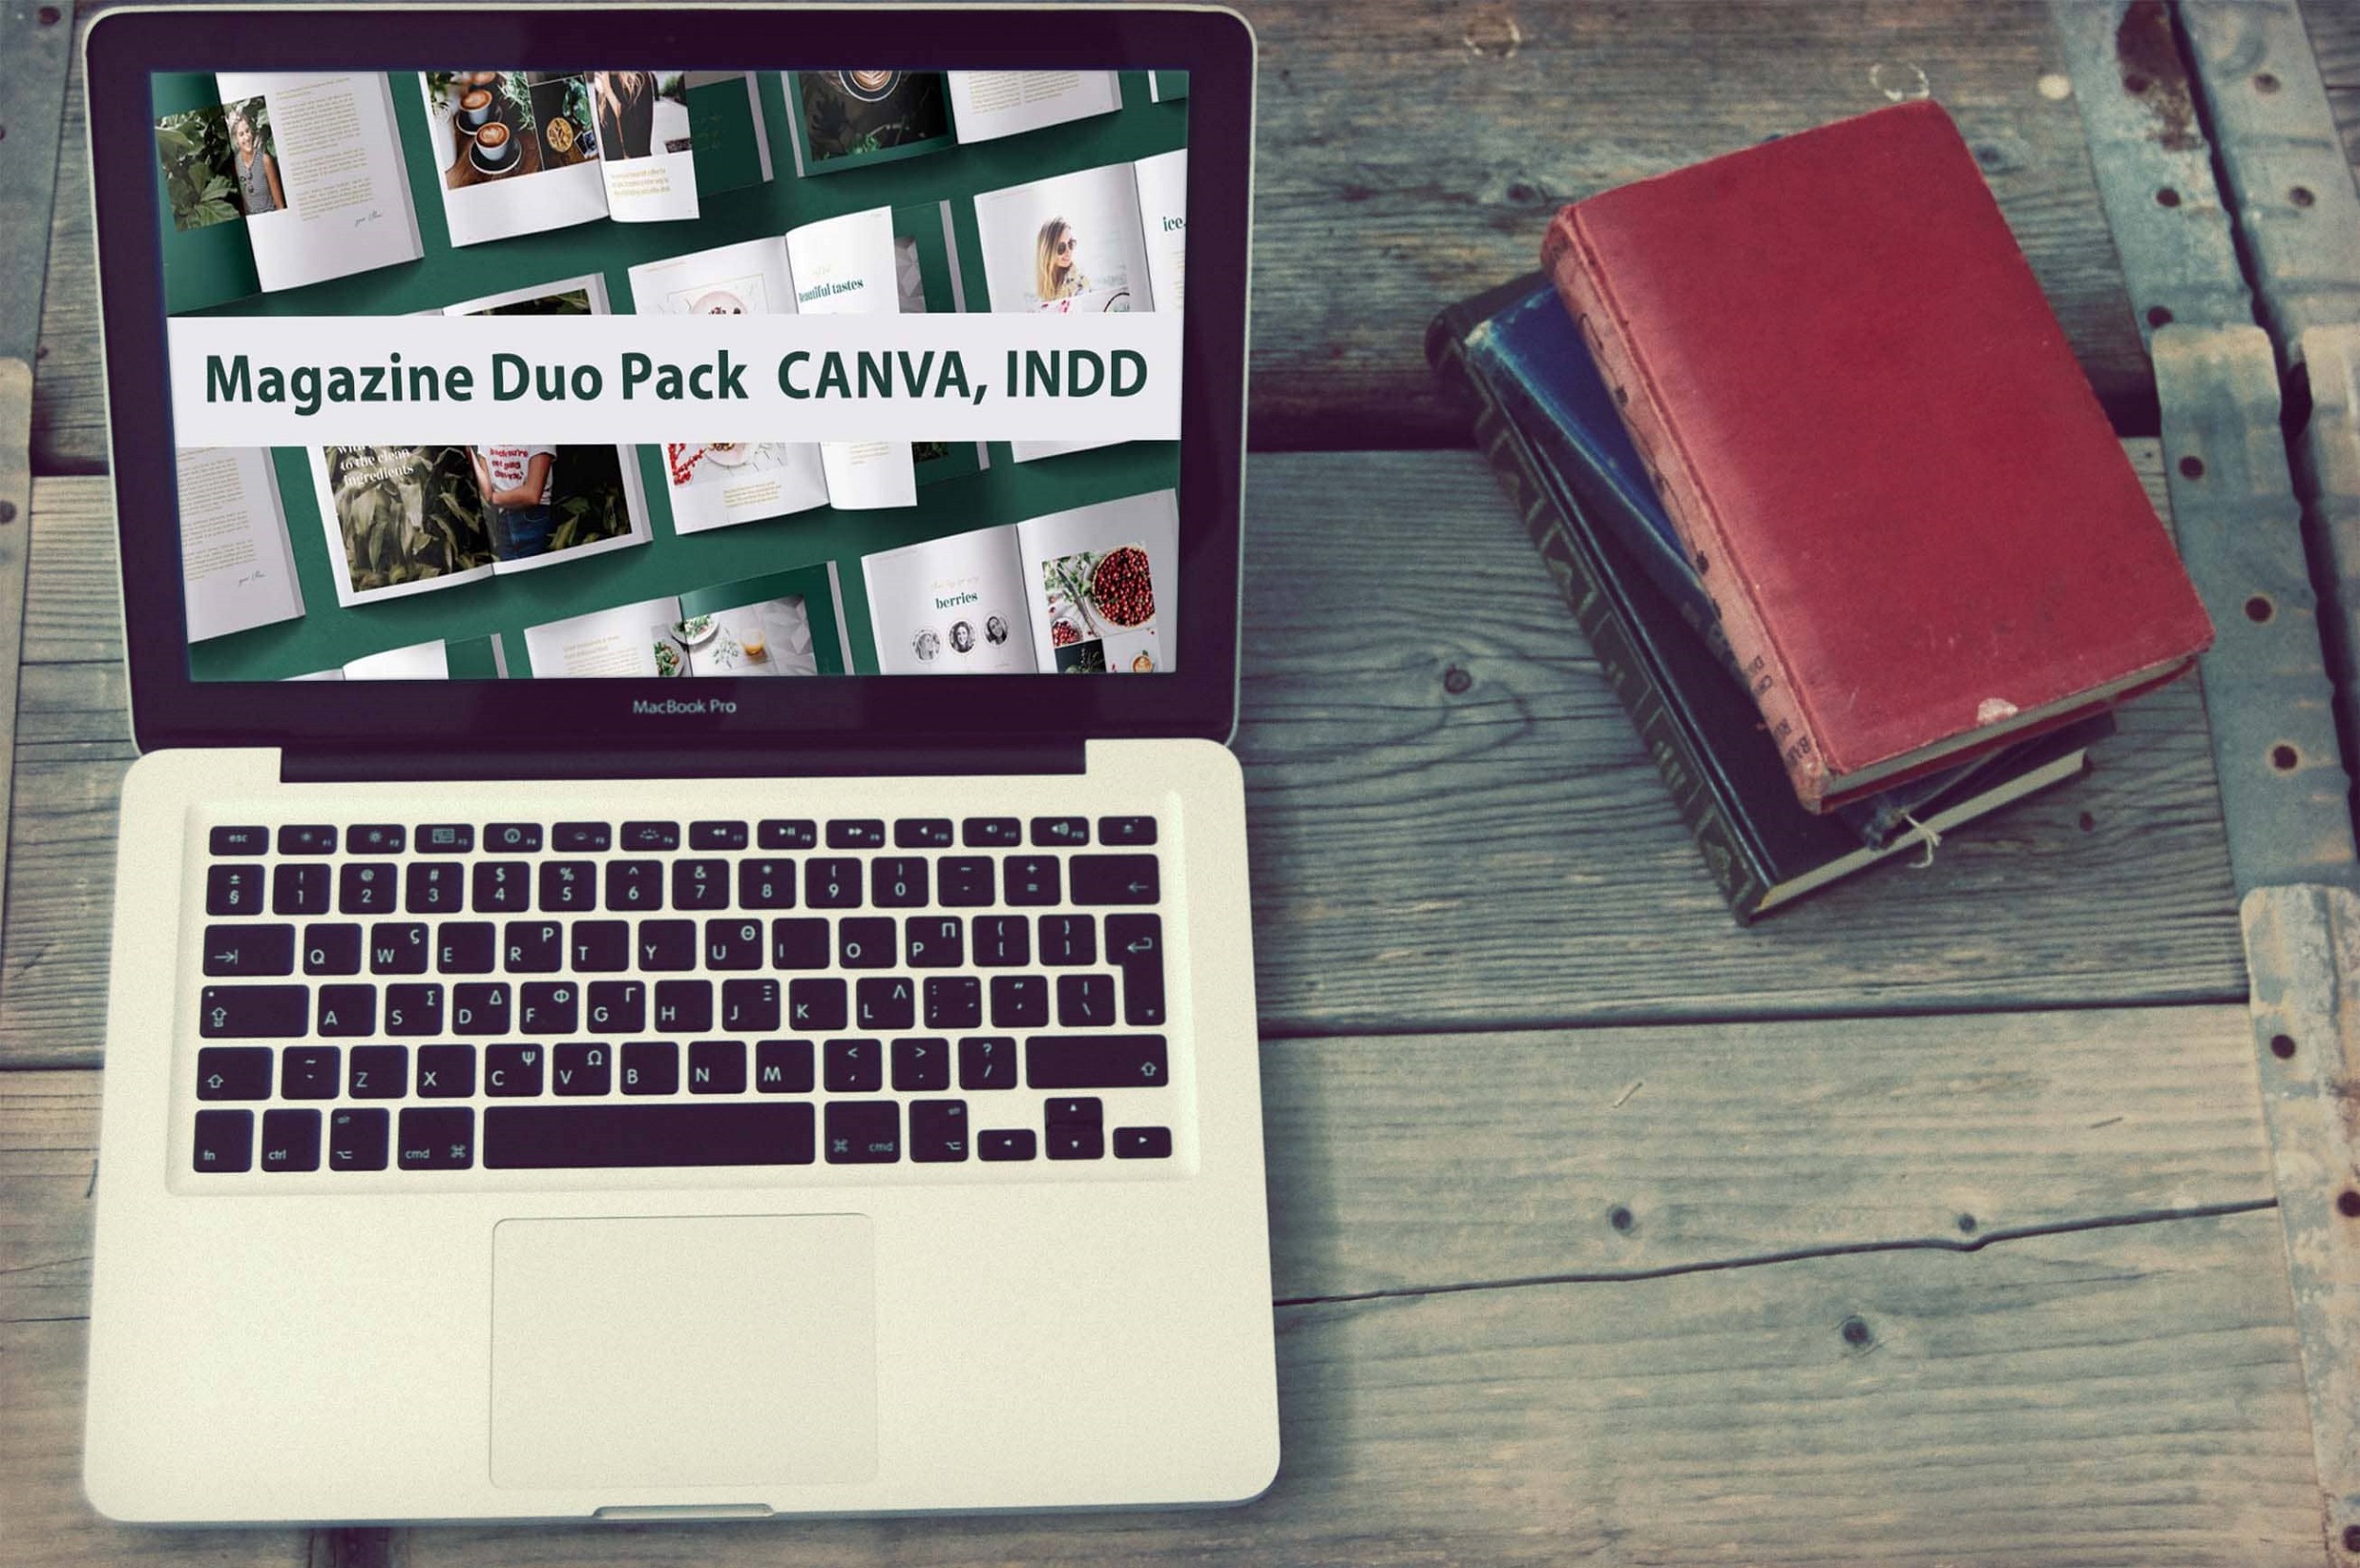 magazine duo pack canva indd notebook mockup.